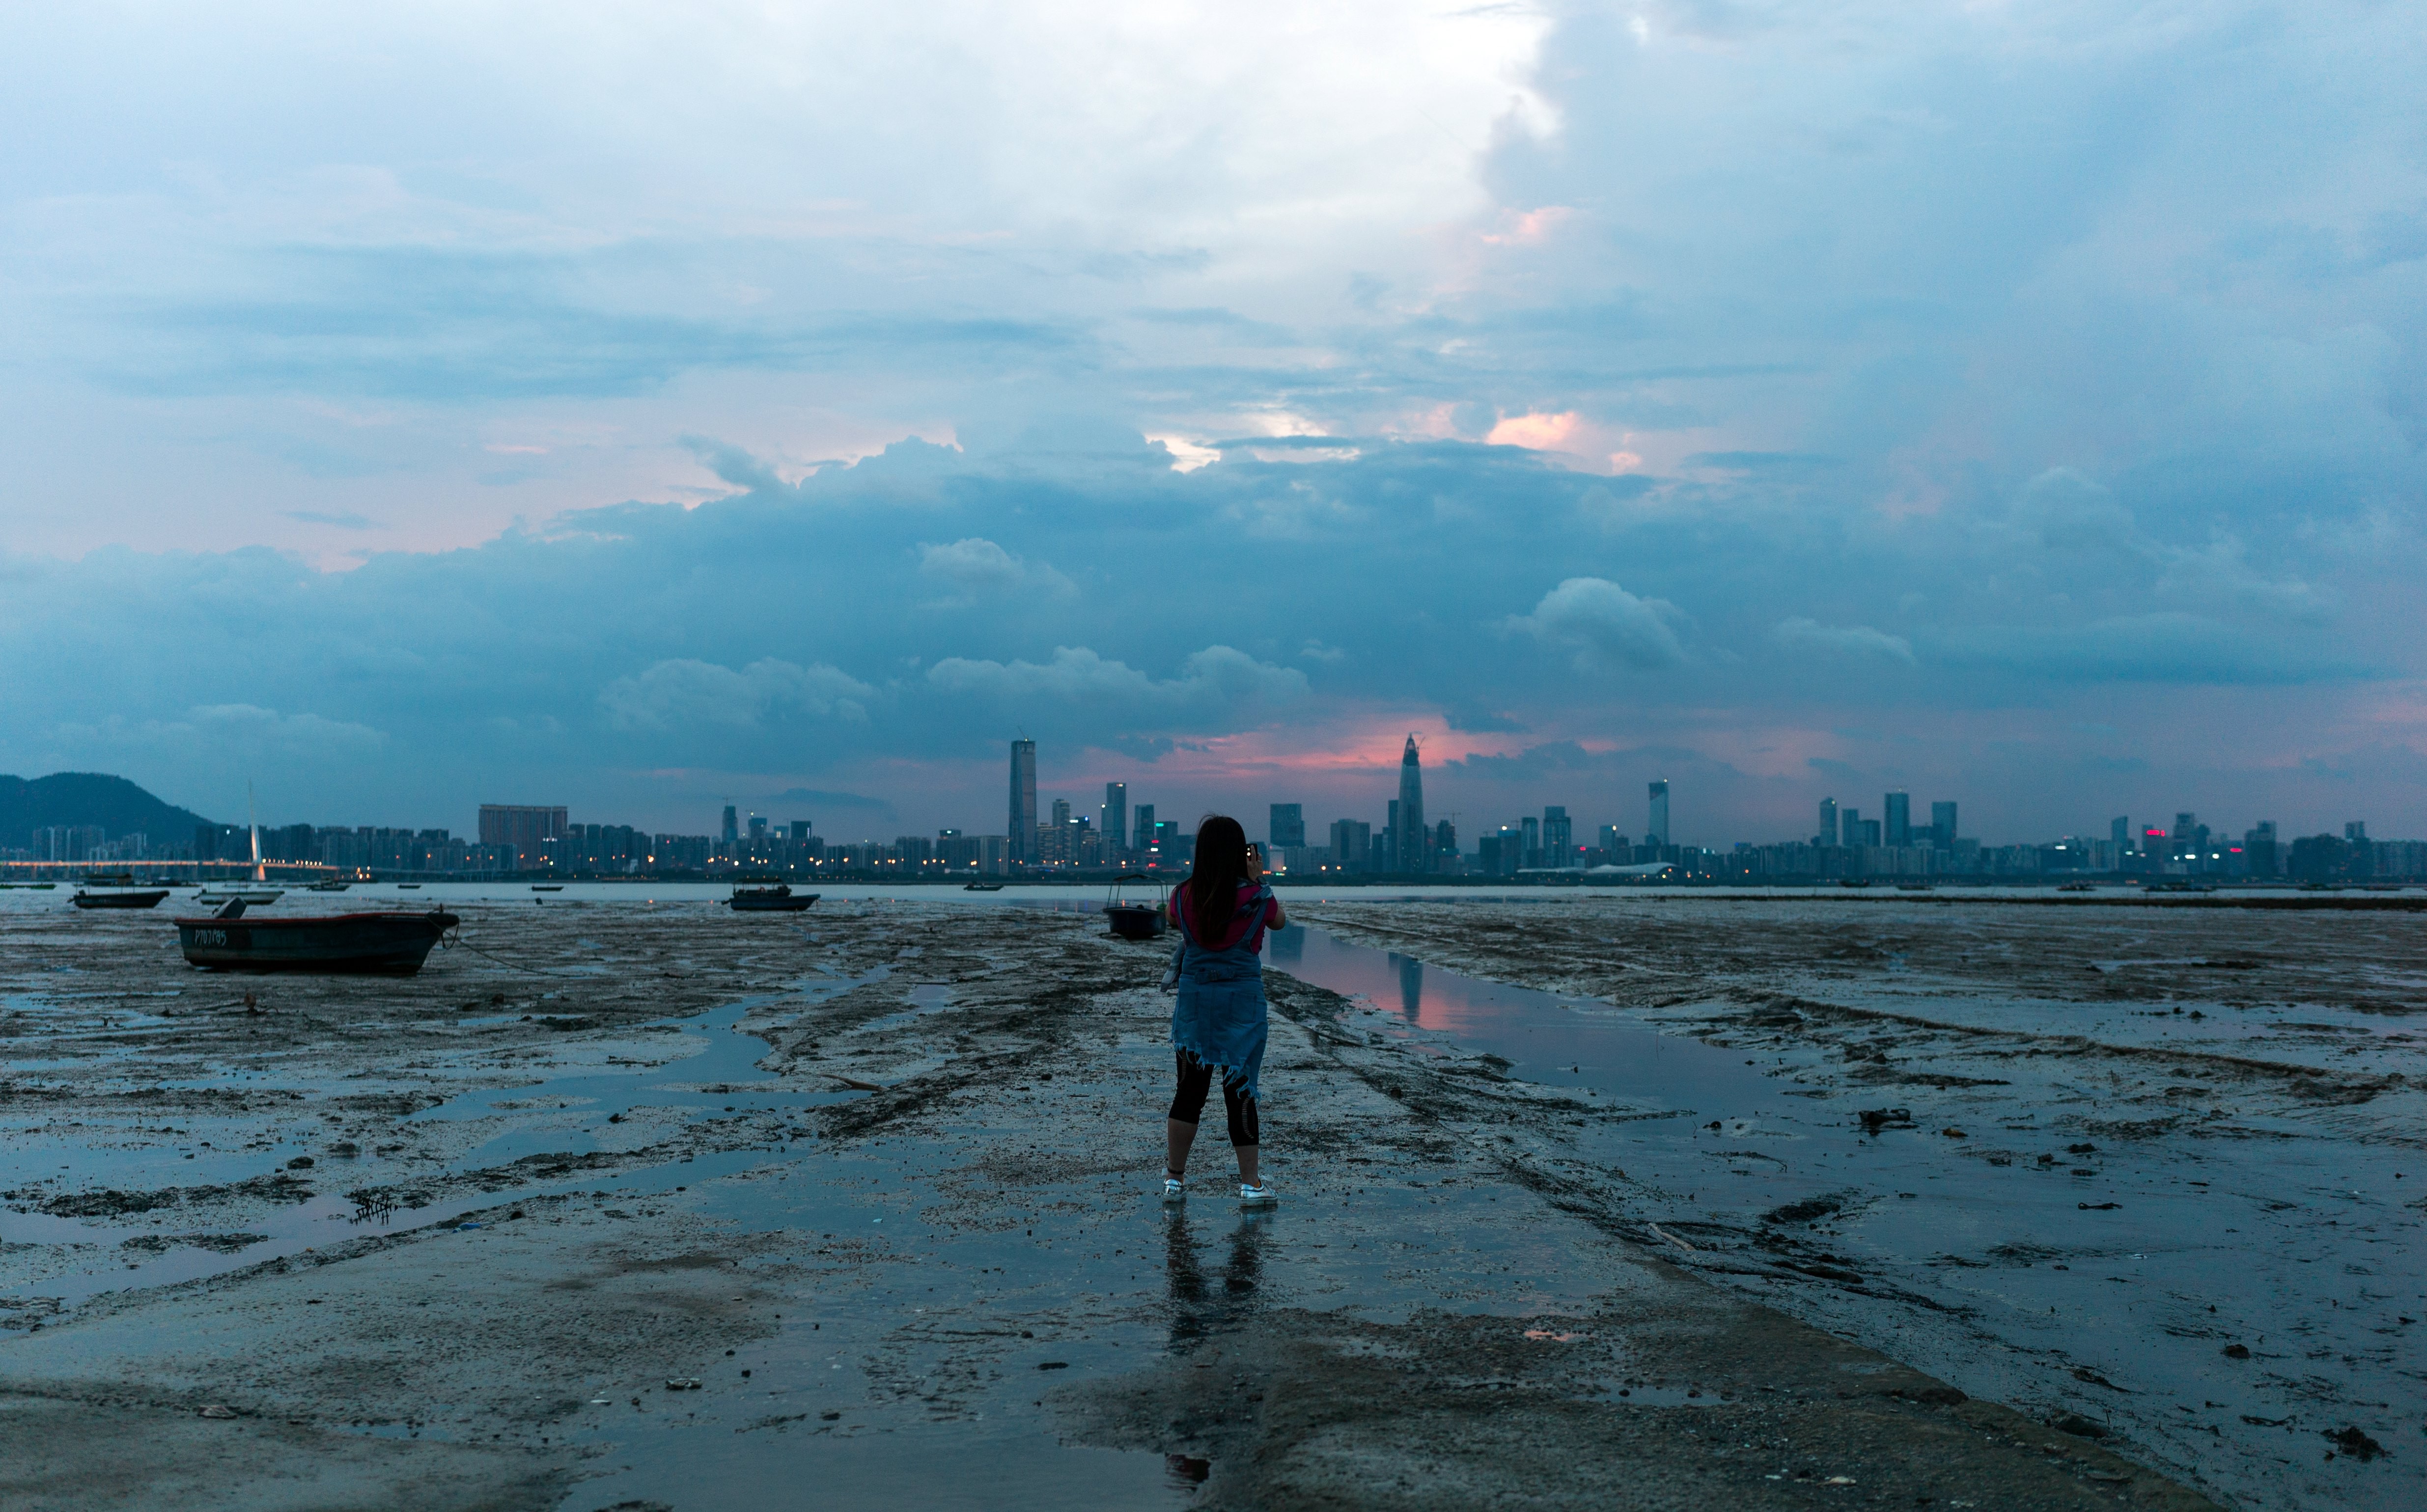 The city of Shenzhen is seen across Deep Bay in Lau Fau Shan, Hong Kong. Hong Kong started as a free port for Chinese trade, but today it is an offshore renminbi hub. This evolution reflects its traditional “connector” role giving way to that of a “financier”. Photo: EPA